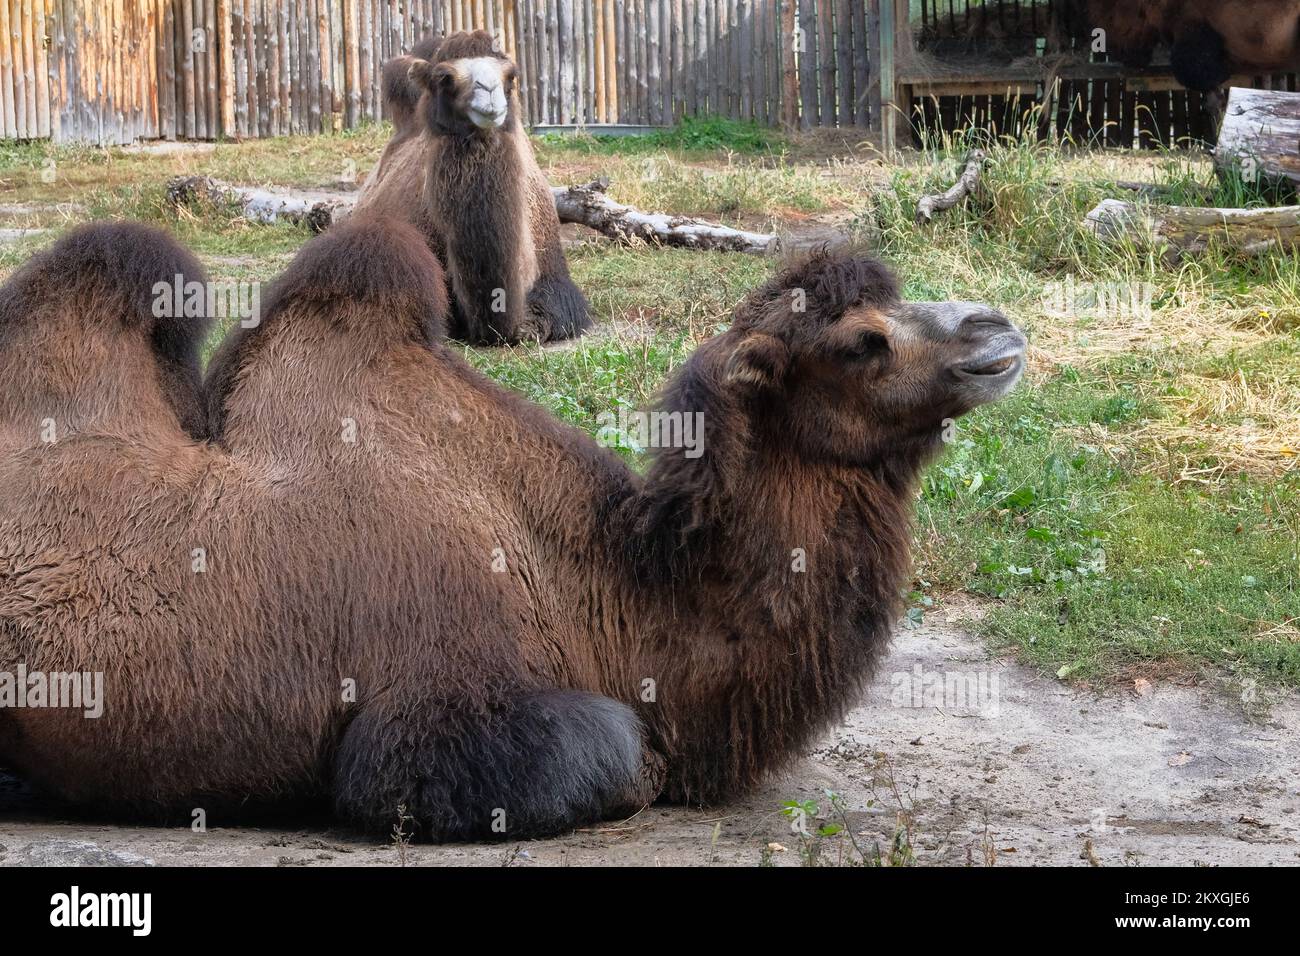 Camel family at the zoo, close up. Keeping wild animals in zoological parks. Stock Photo